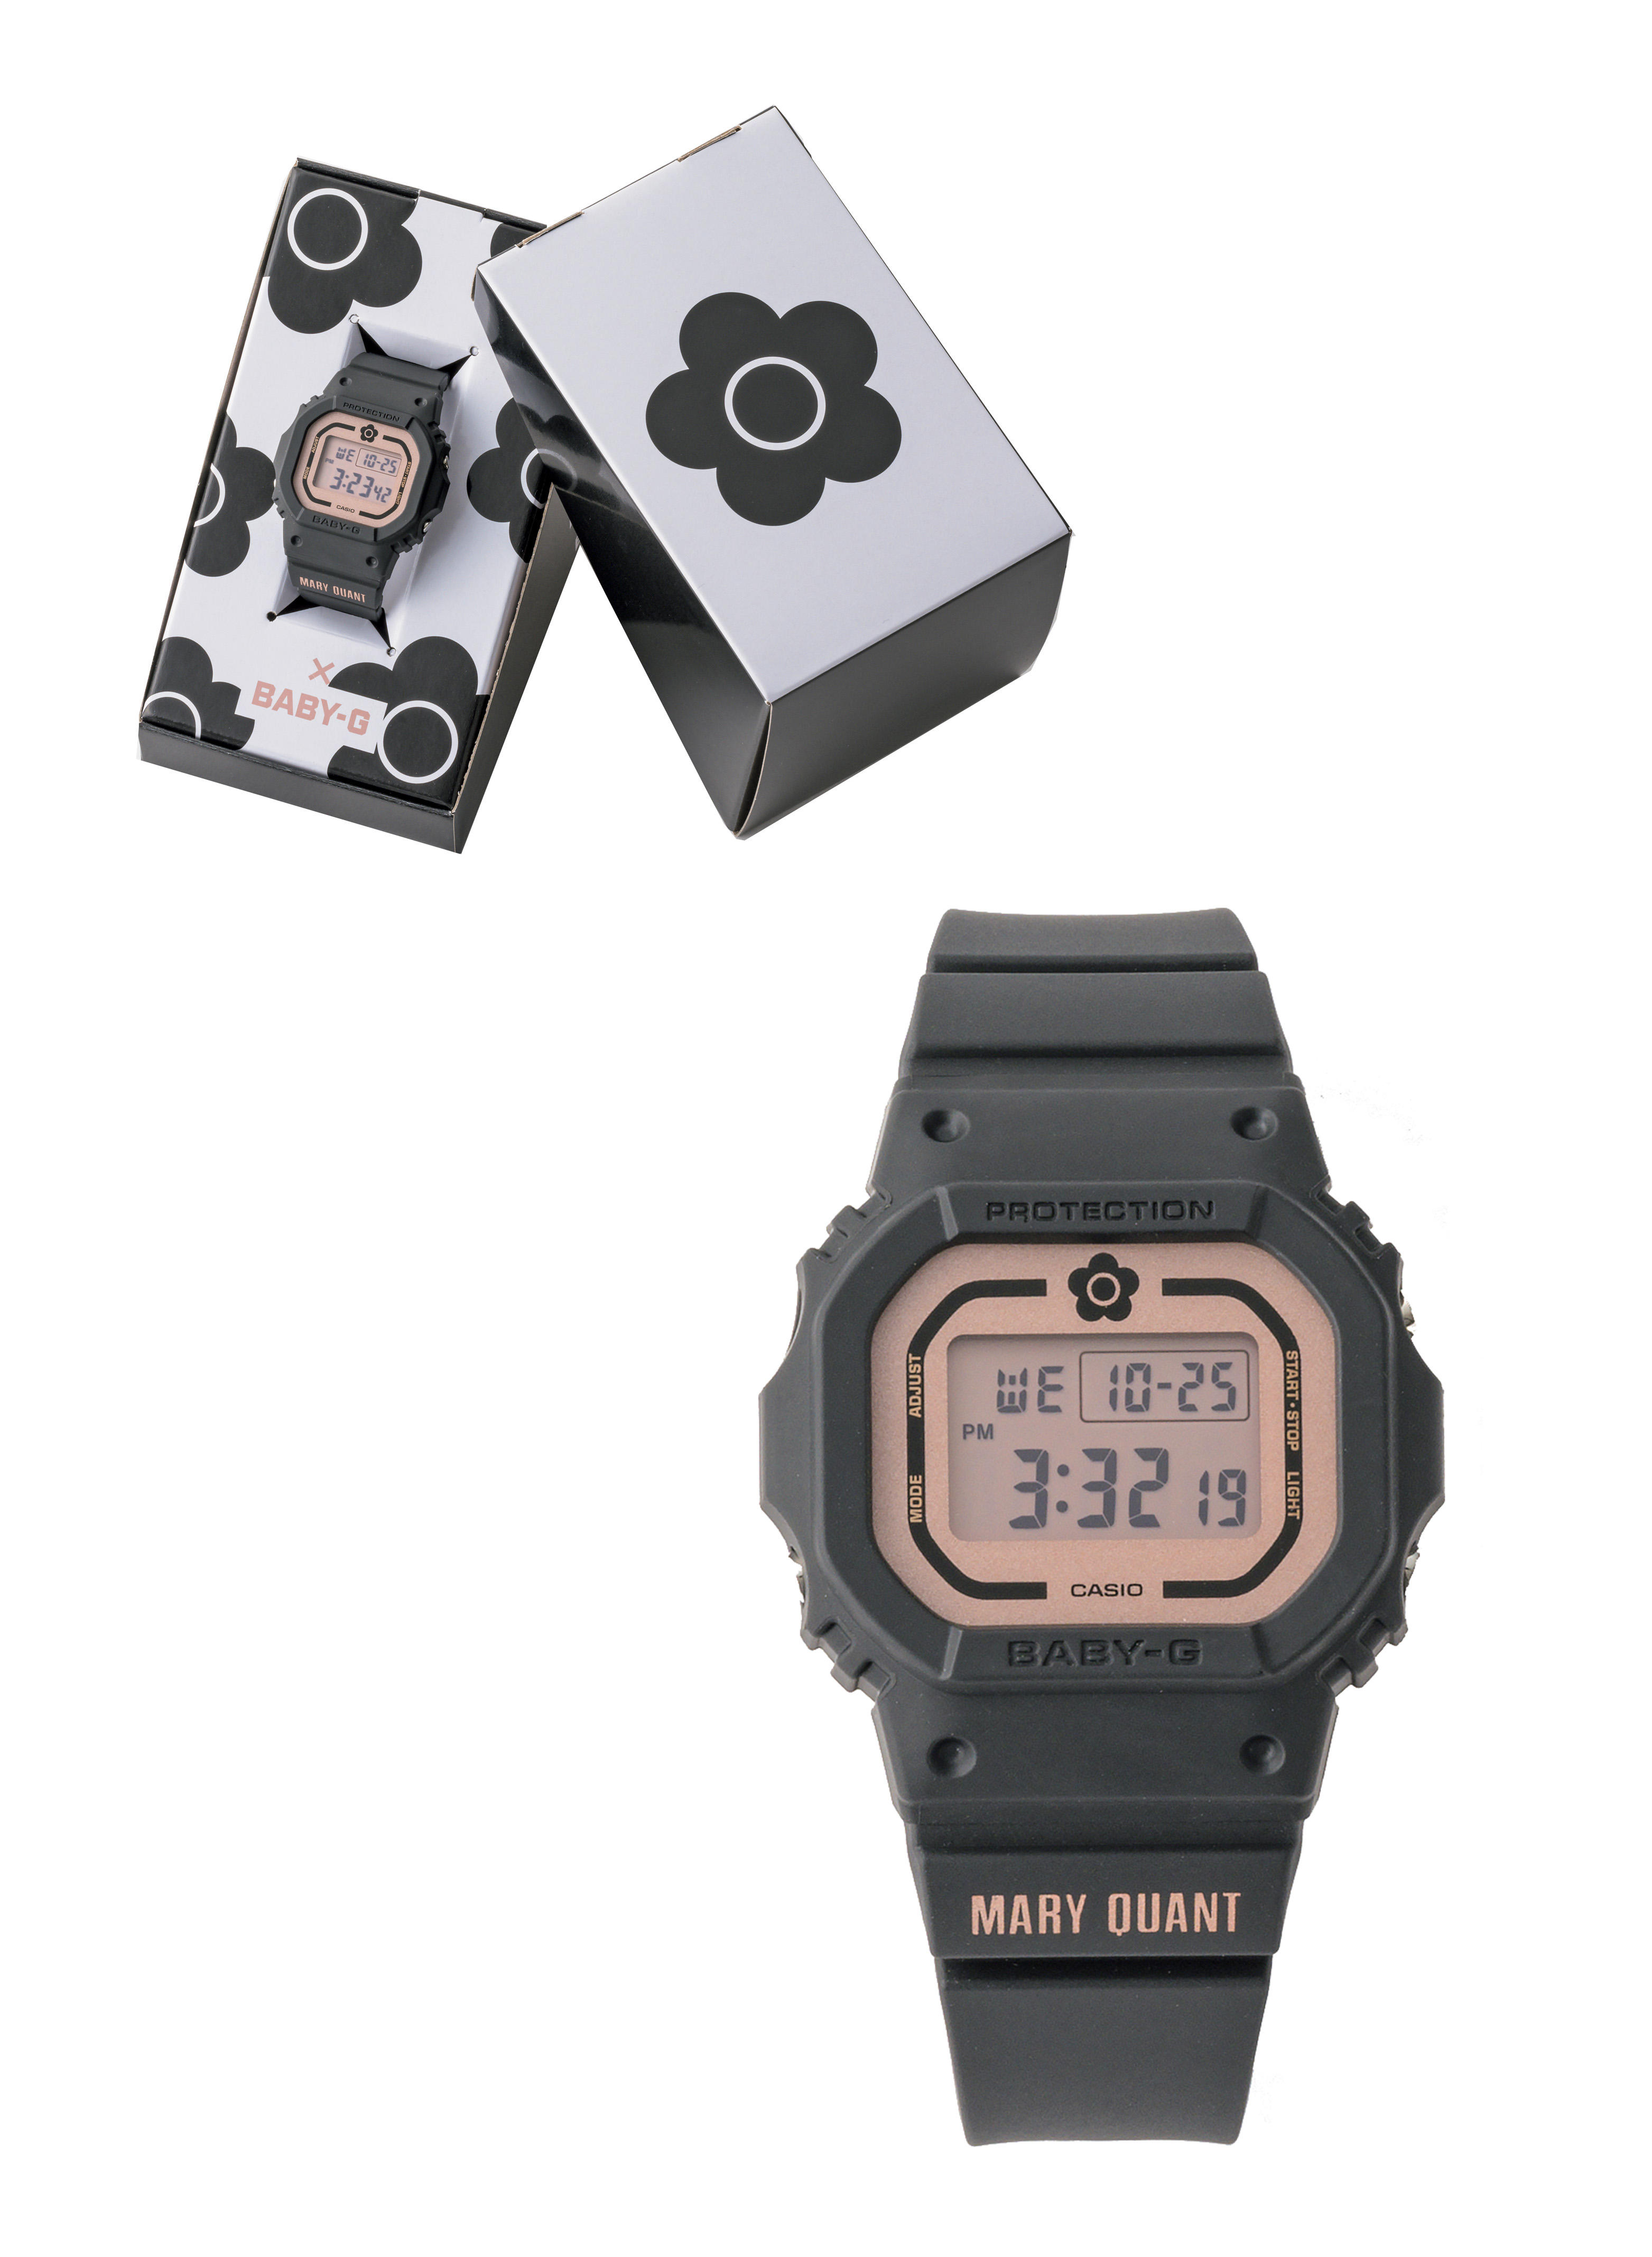 MARY QUANT×BABY-G コラボレーション 第3弾 情報UP！｜MARY QUANT ...